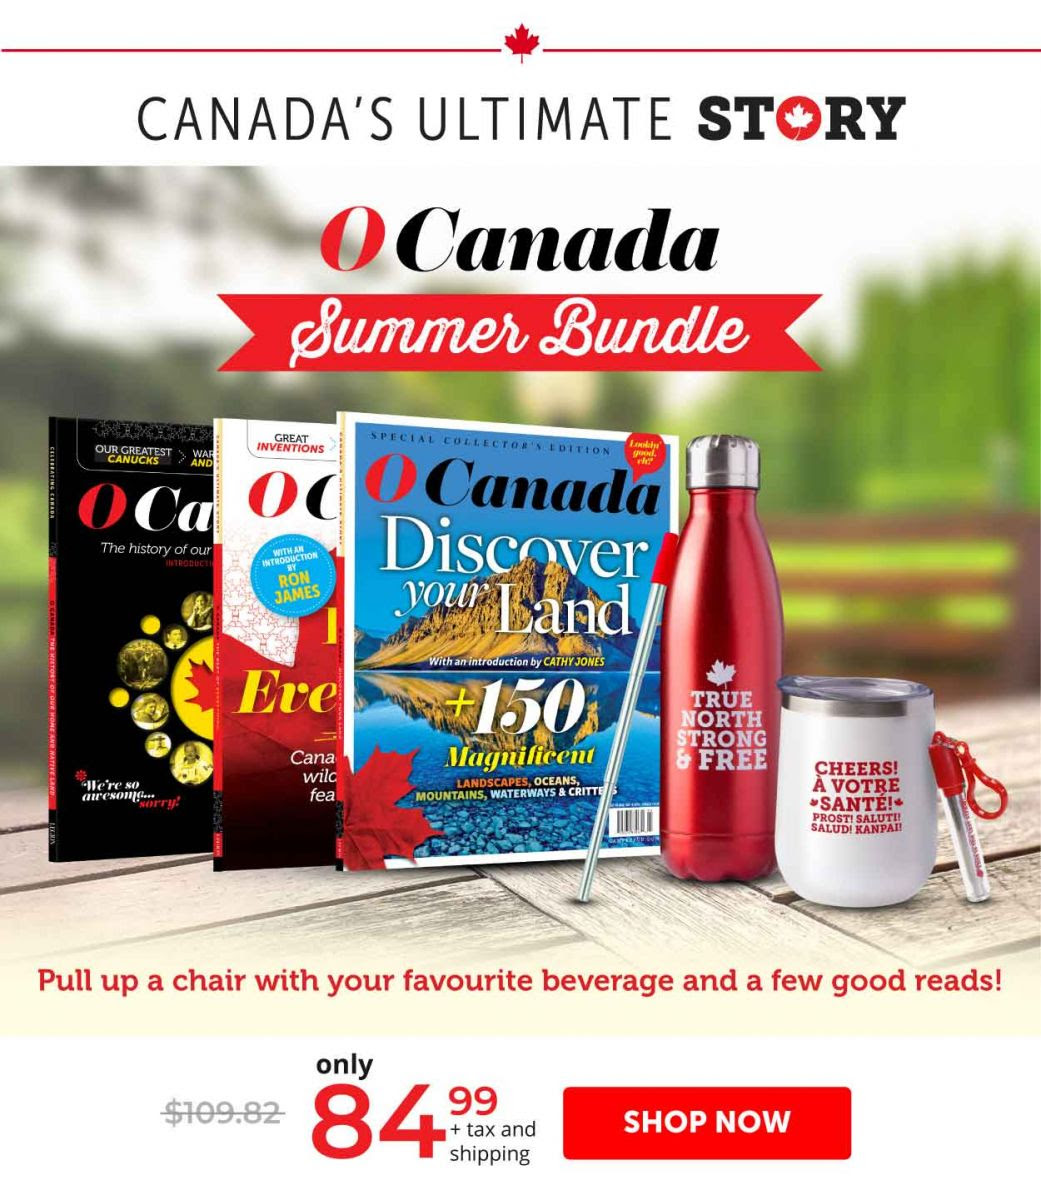 Summer Reading Deals LAST WEEK TO PRE-ORDER! Order the latest Canada’s Ultimate Story special edition BEFORE it goes on newsstands!